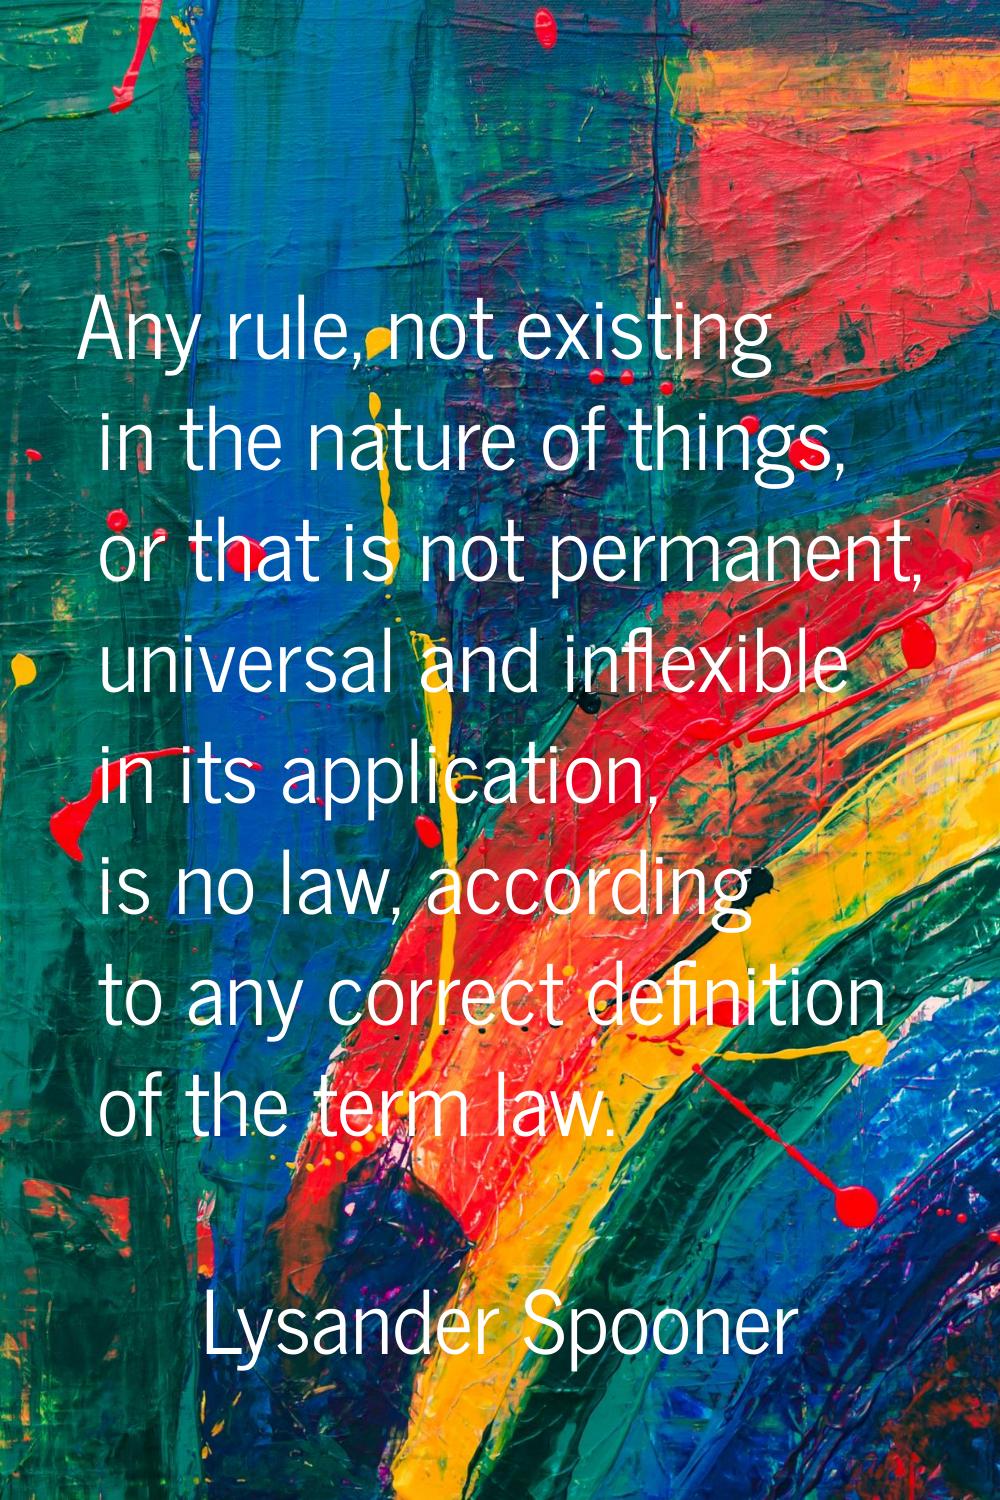 Any rule, not existing in the nature of things, or that is not permanent, universal and inflexible 